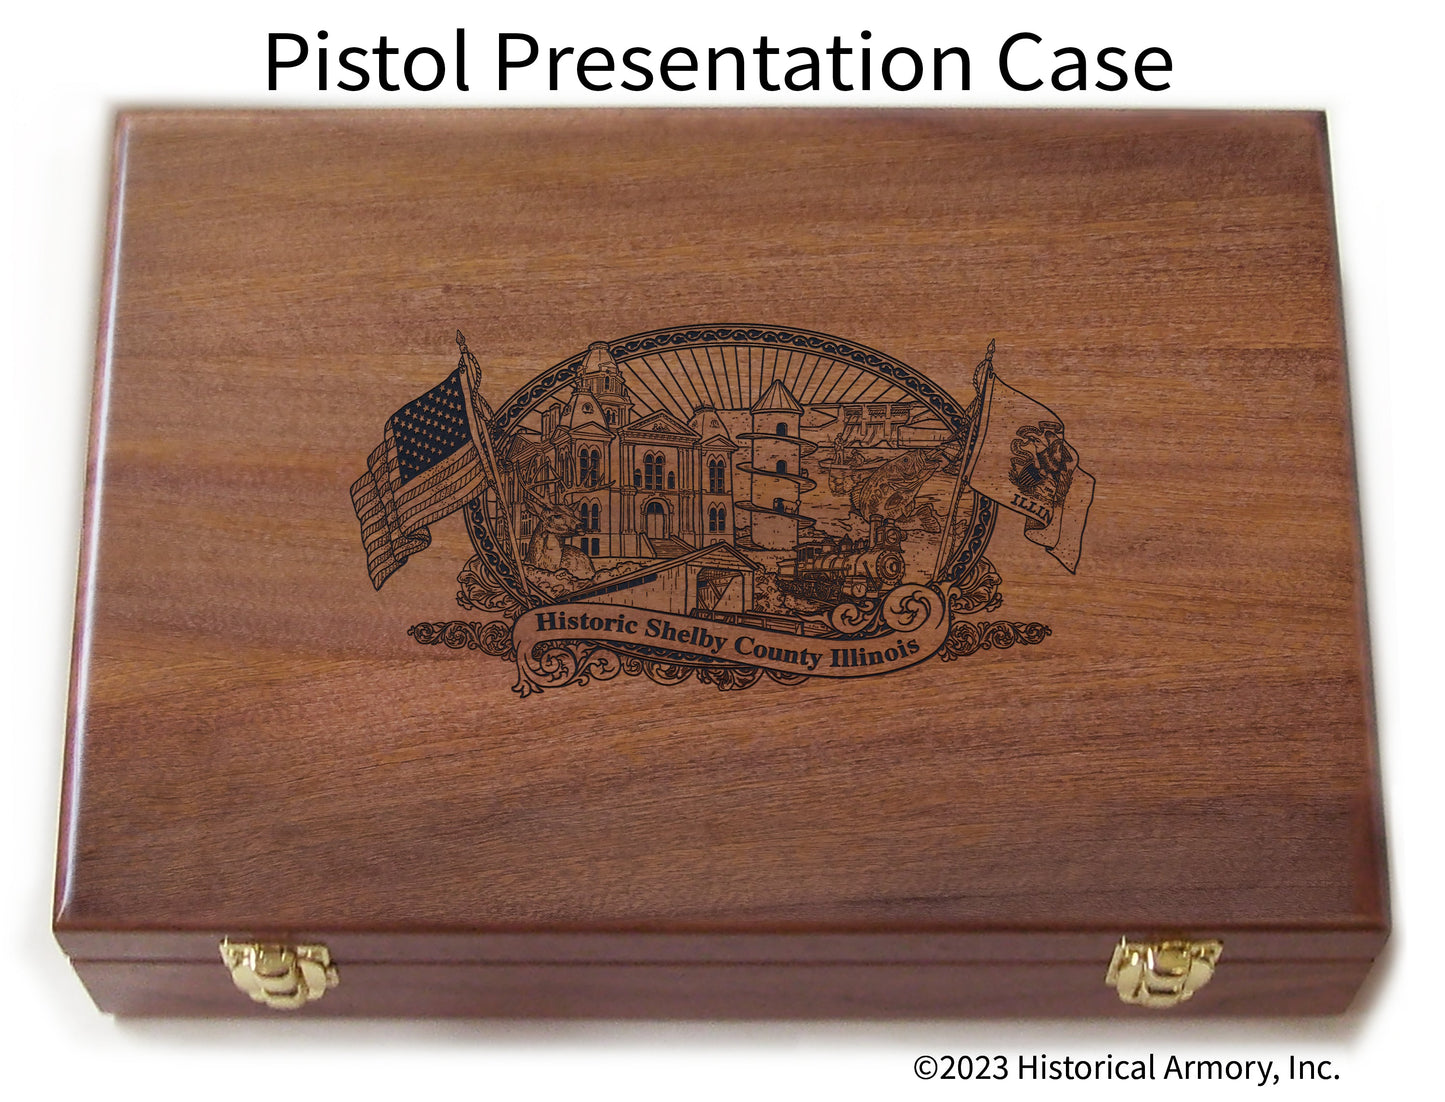 Shelby County Illinois Engraved .45 Auto Ruger 1911 Presentation Case